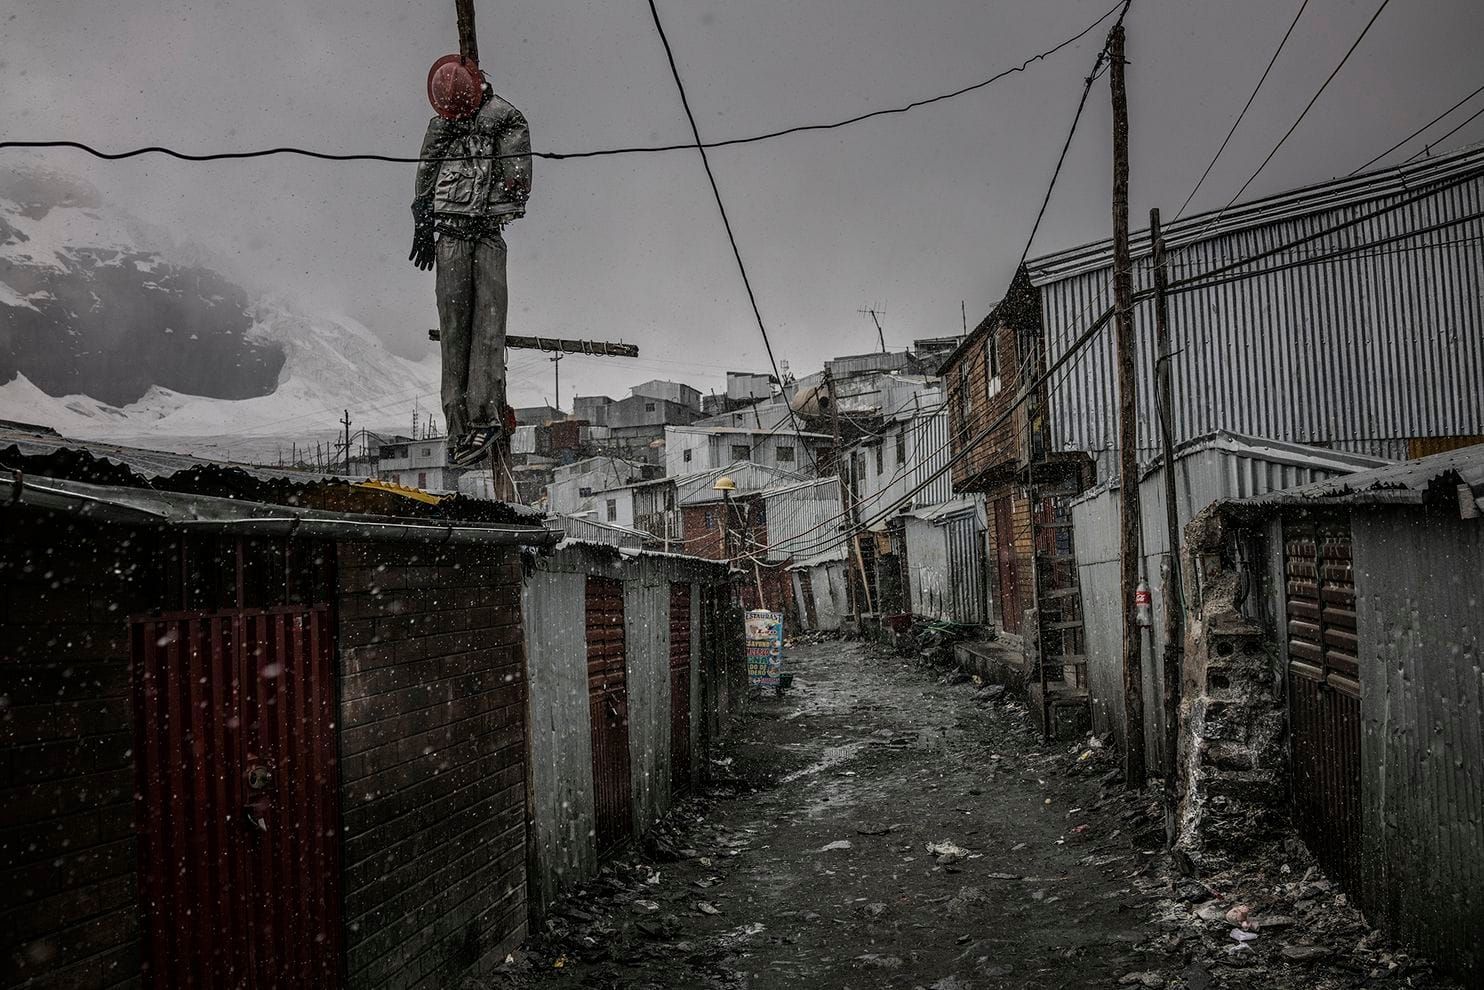 An effigy hangs from a pole as a warning to criminals. Mob justice and these kinds of warnings are common in communities in Peru and Bolivia. A reported 10 police officers keep the peace here. The presence of large quantities of gold and widespread alcohol consumption make crime a major issue in this Andean settlement. Peru, 2019. Image by James Whitlow Delano.